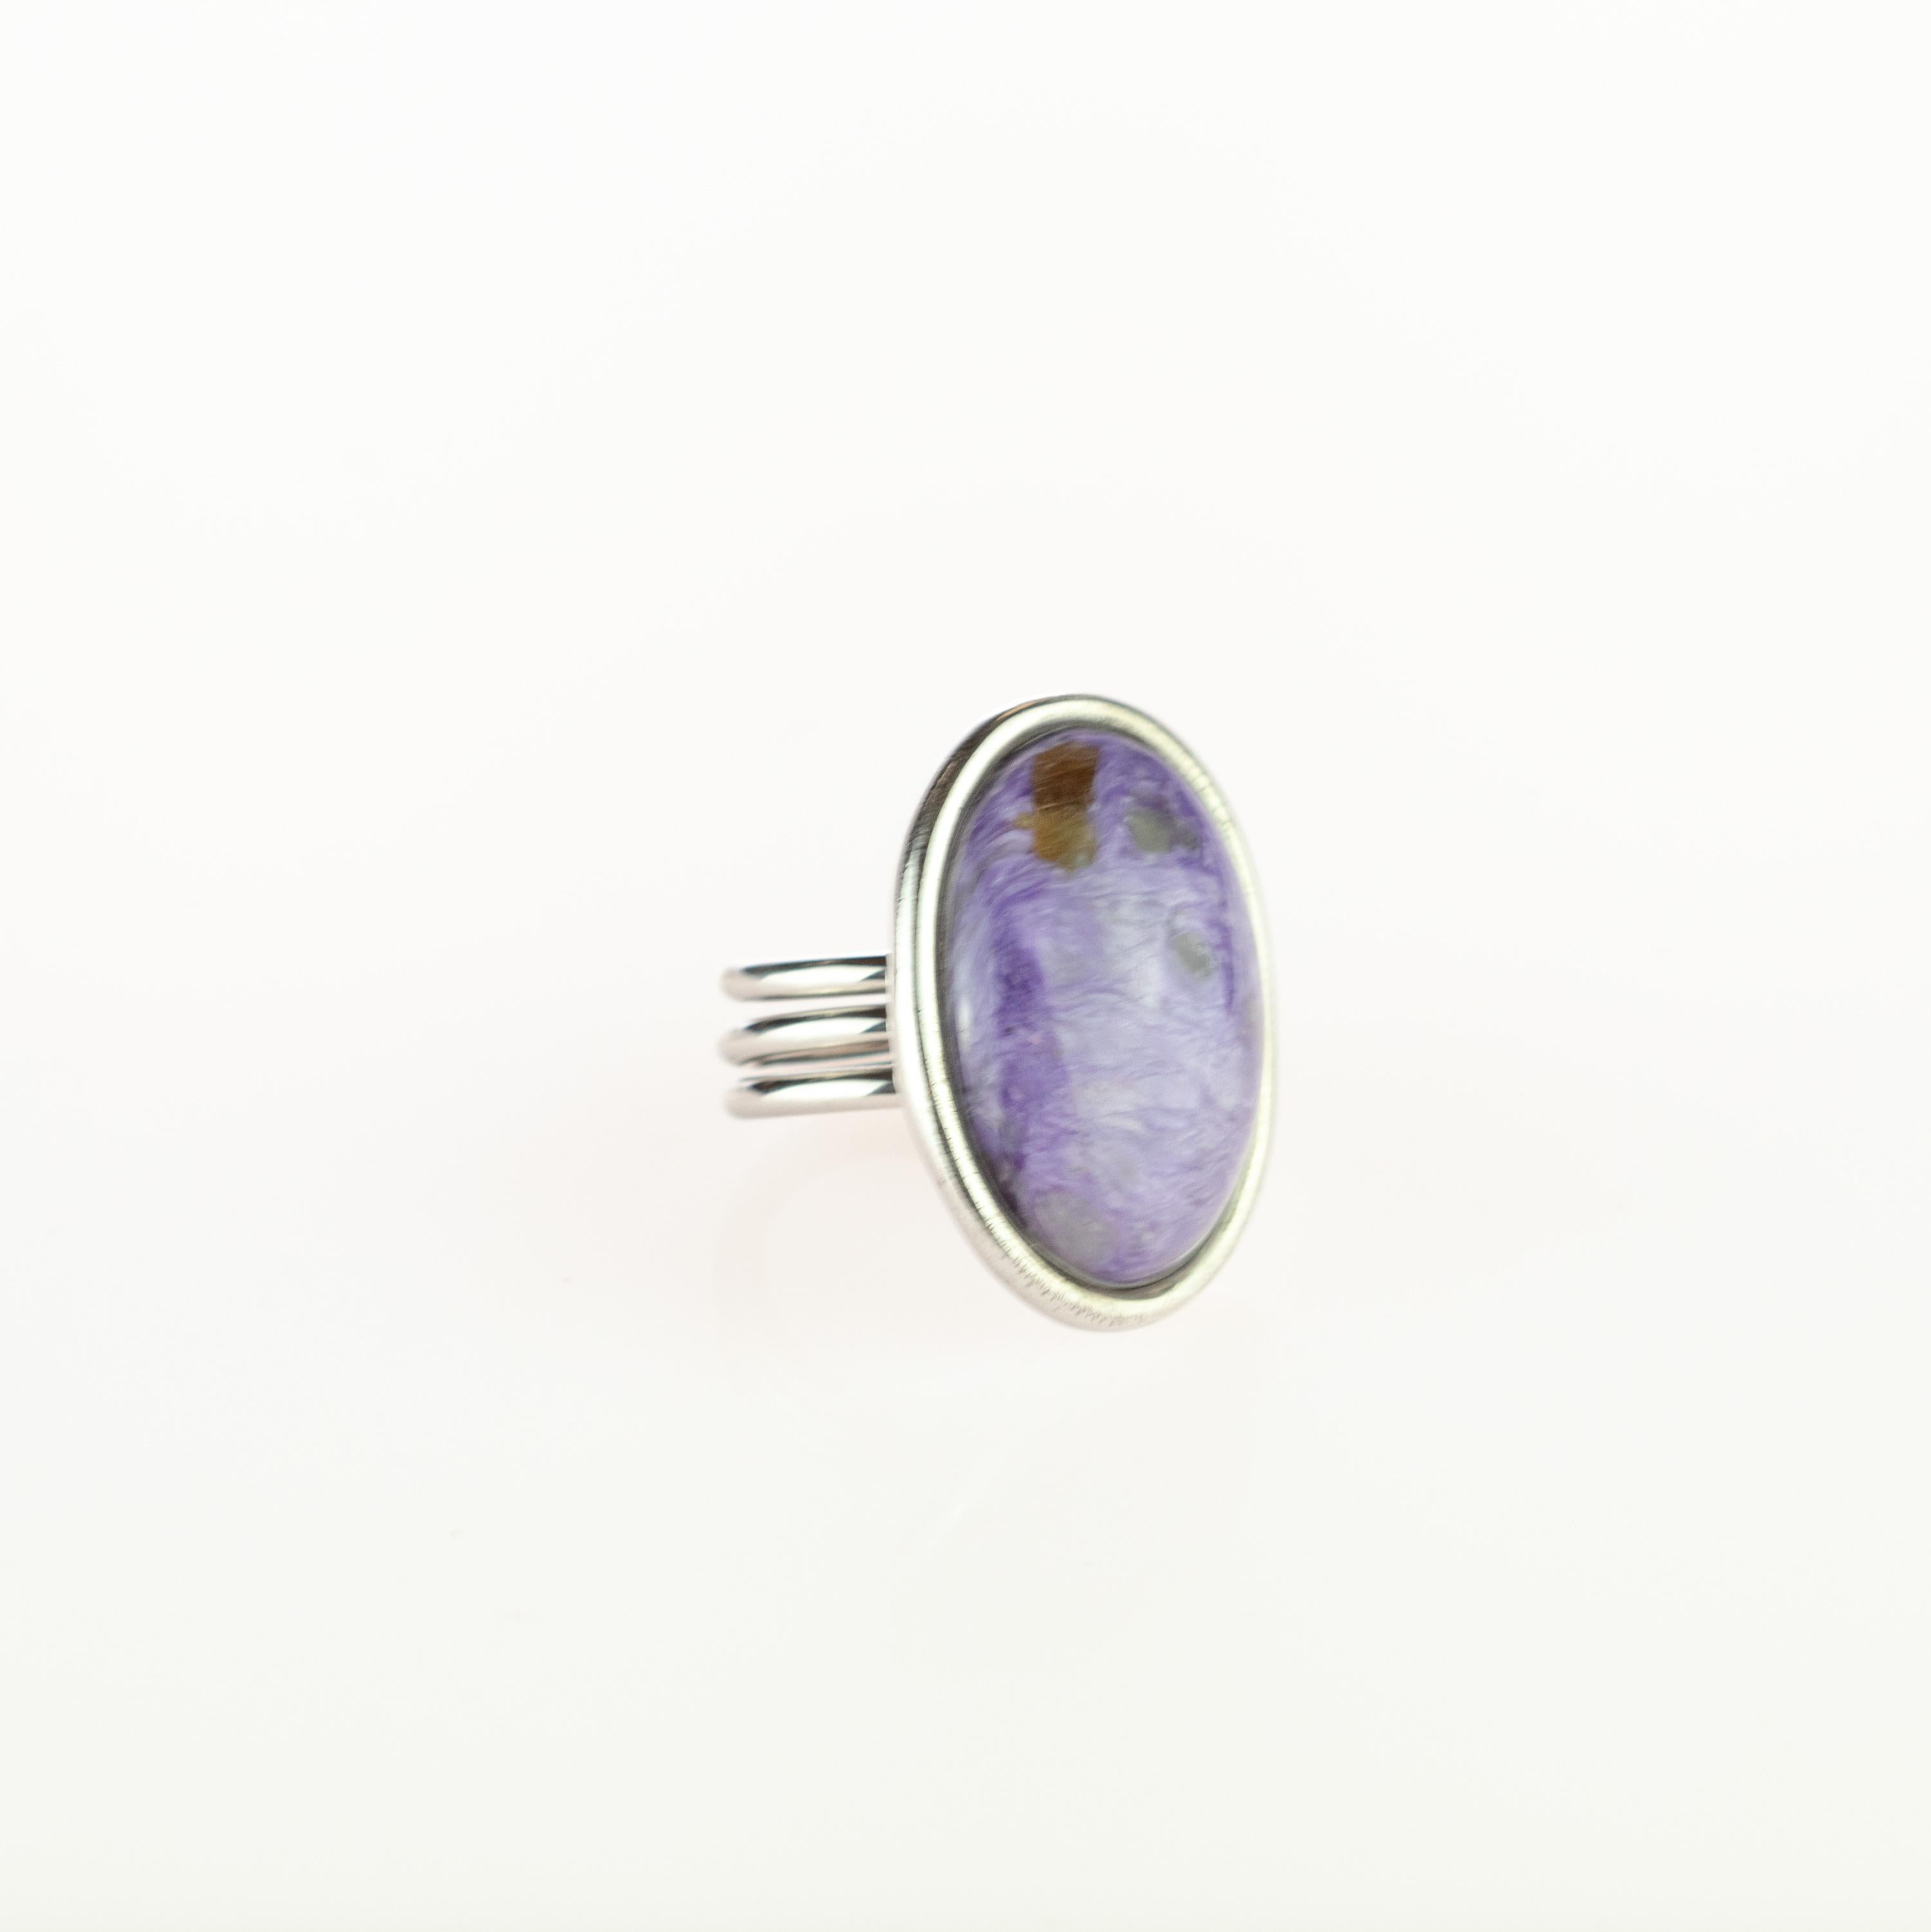 Purple charoite precious stone setted on a modern design jewel. A majestic gem surrounded by 925 sterling silver holded by 3 stripes. A simple but exquisite solitaire design of an oval cabochon cocktail ring that recreates a marvelous design